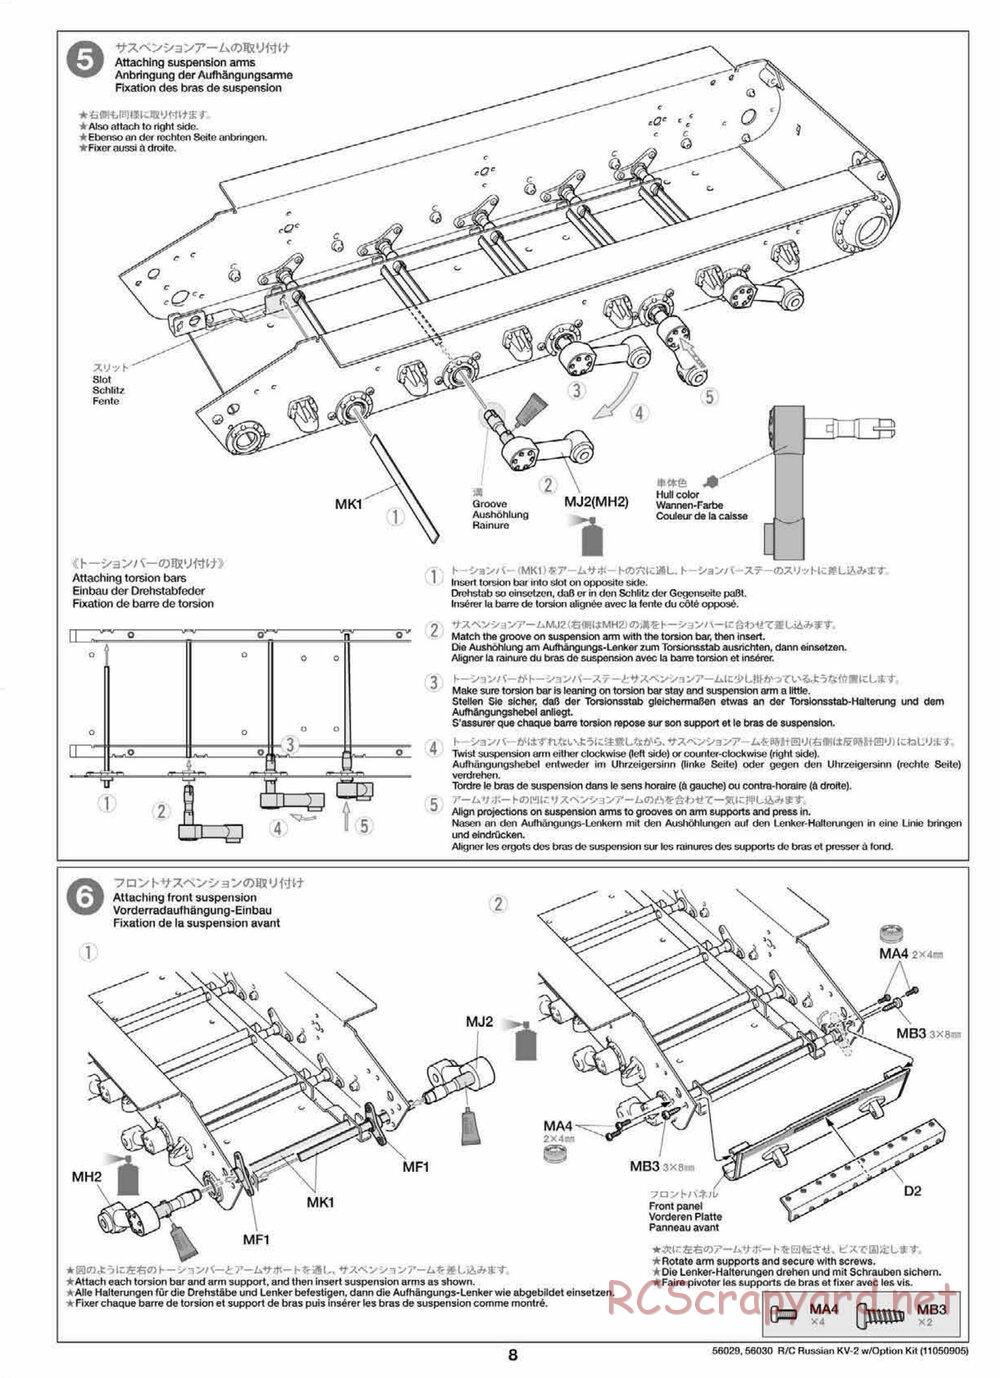 Tamiya - Russian Heavy Tank KV-2 Gigant - 1/16 Scale Chassis - Manual - Page 8